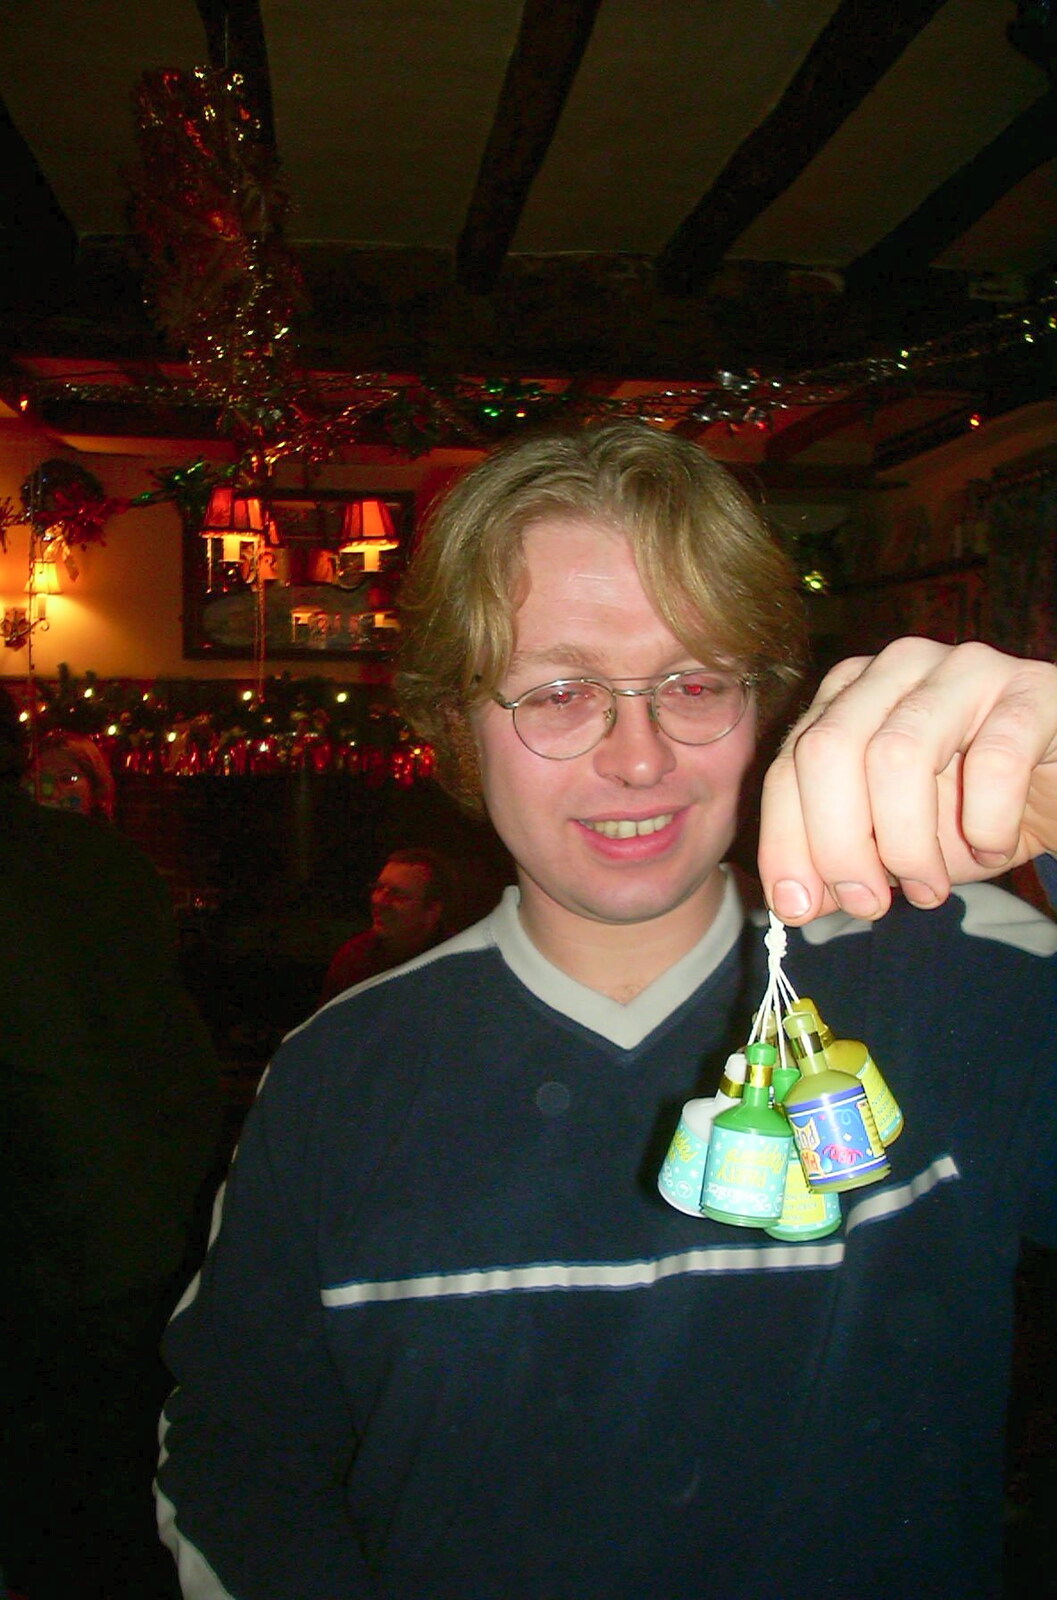 New Year's Eve at the Swan Inn, Brome, Suffolk - 31st December 2002: Marc waves around a bundle of poppers